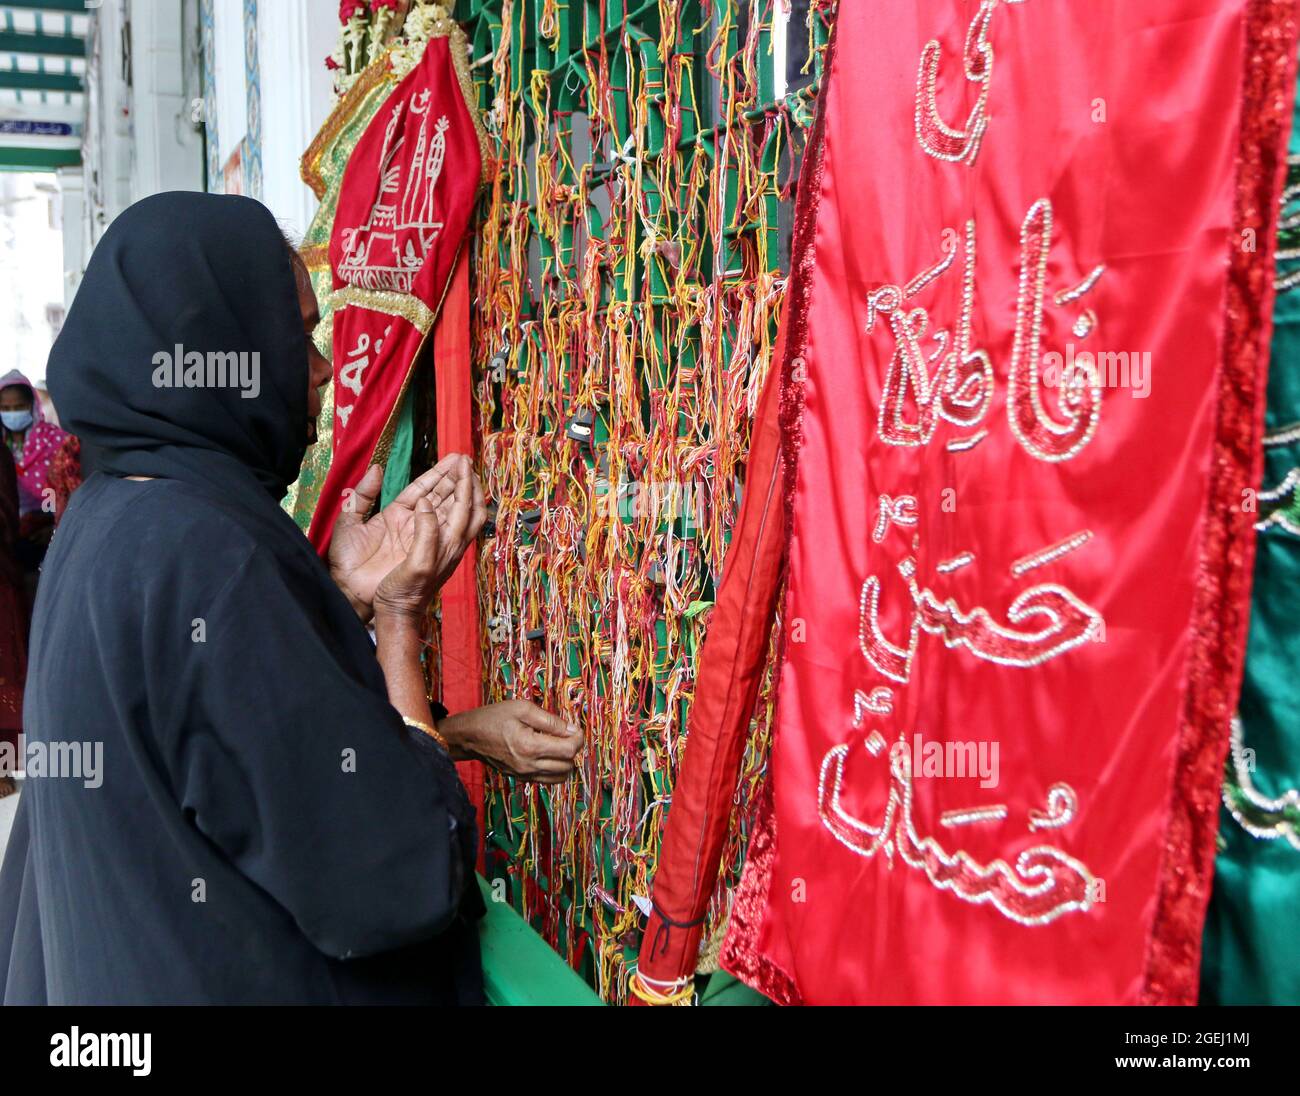 Dhaka, Bangladesh, August 20: A shia woman prays  during  the day of mourning to commemorate Ashura Day. The tenth day of Muharram is celebrated as Ashura, Shia muslims celebrate the day as mourning day to recalling the martyrdom of Prophet Hazrat Muhammad's grandson Hazrat Imam Hussain, his relatives and 72 supporters during the clash of Karbala on this day in the Hijri year of 61. Credit: Habibur Rahman / Eyepix Group/Alamy Live News Stock Photo